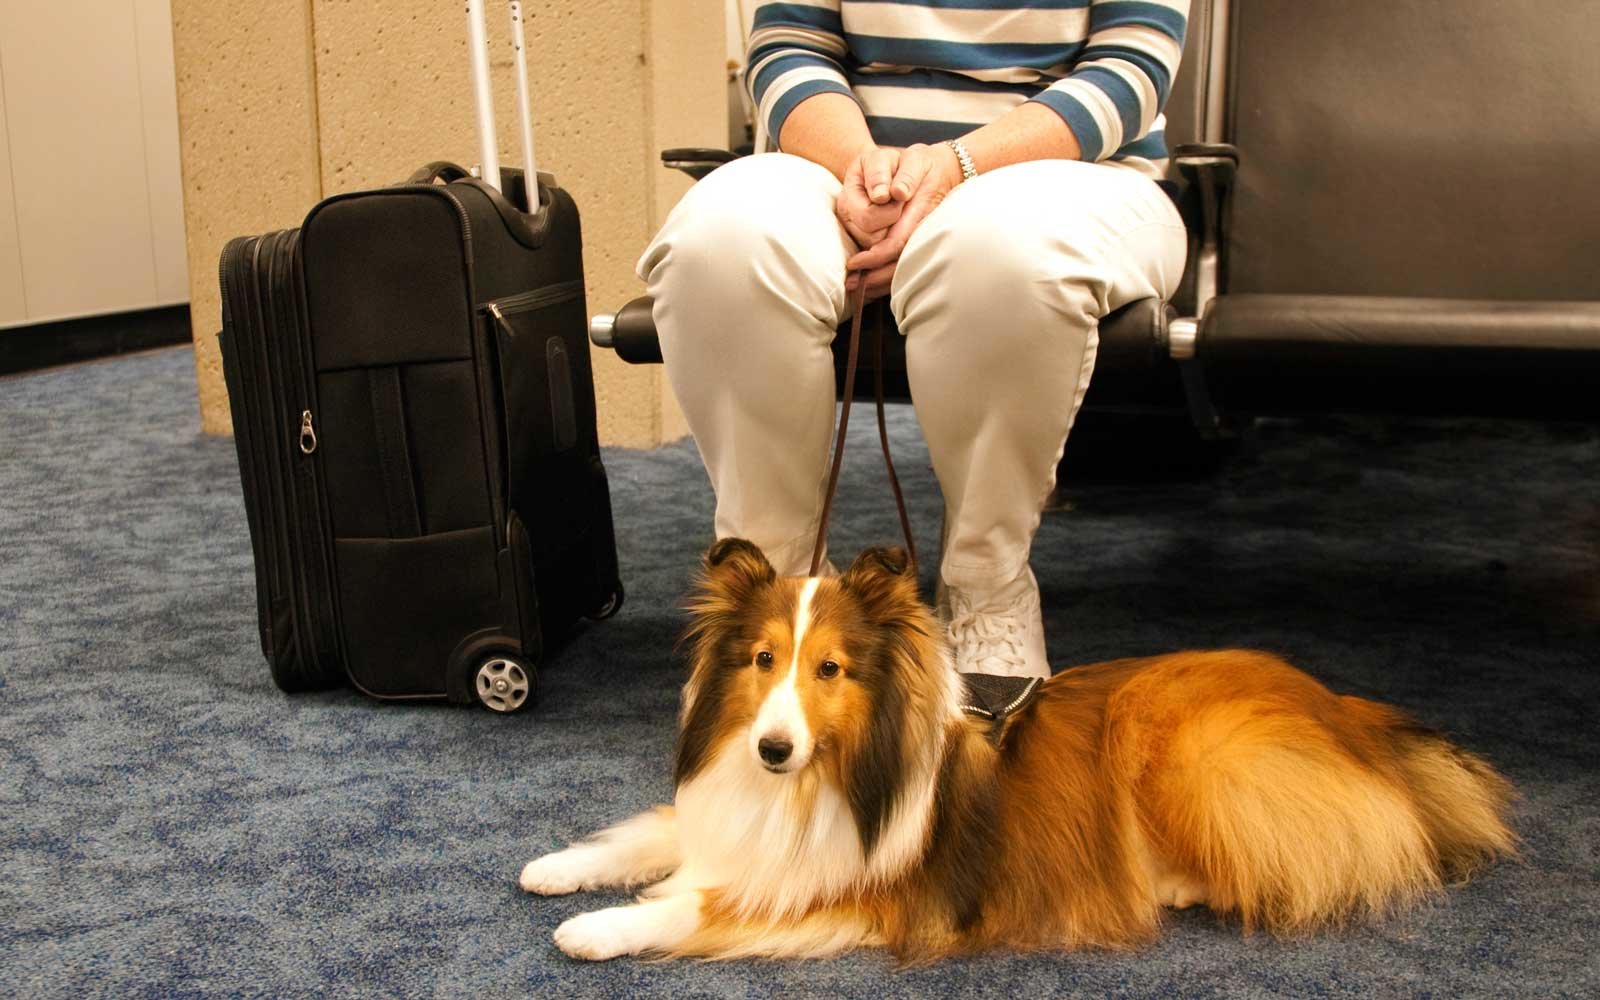 Service dog and owner sitting at airport waiting to board the plane pet